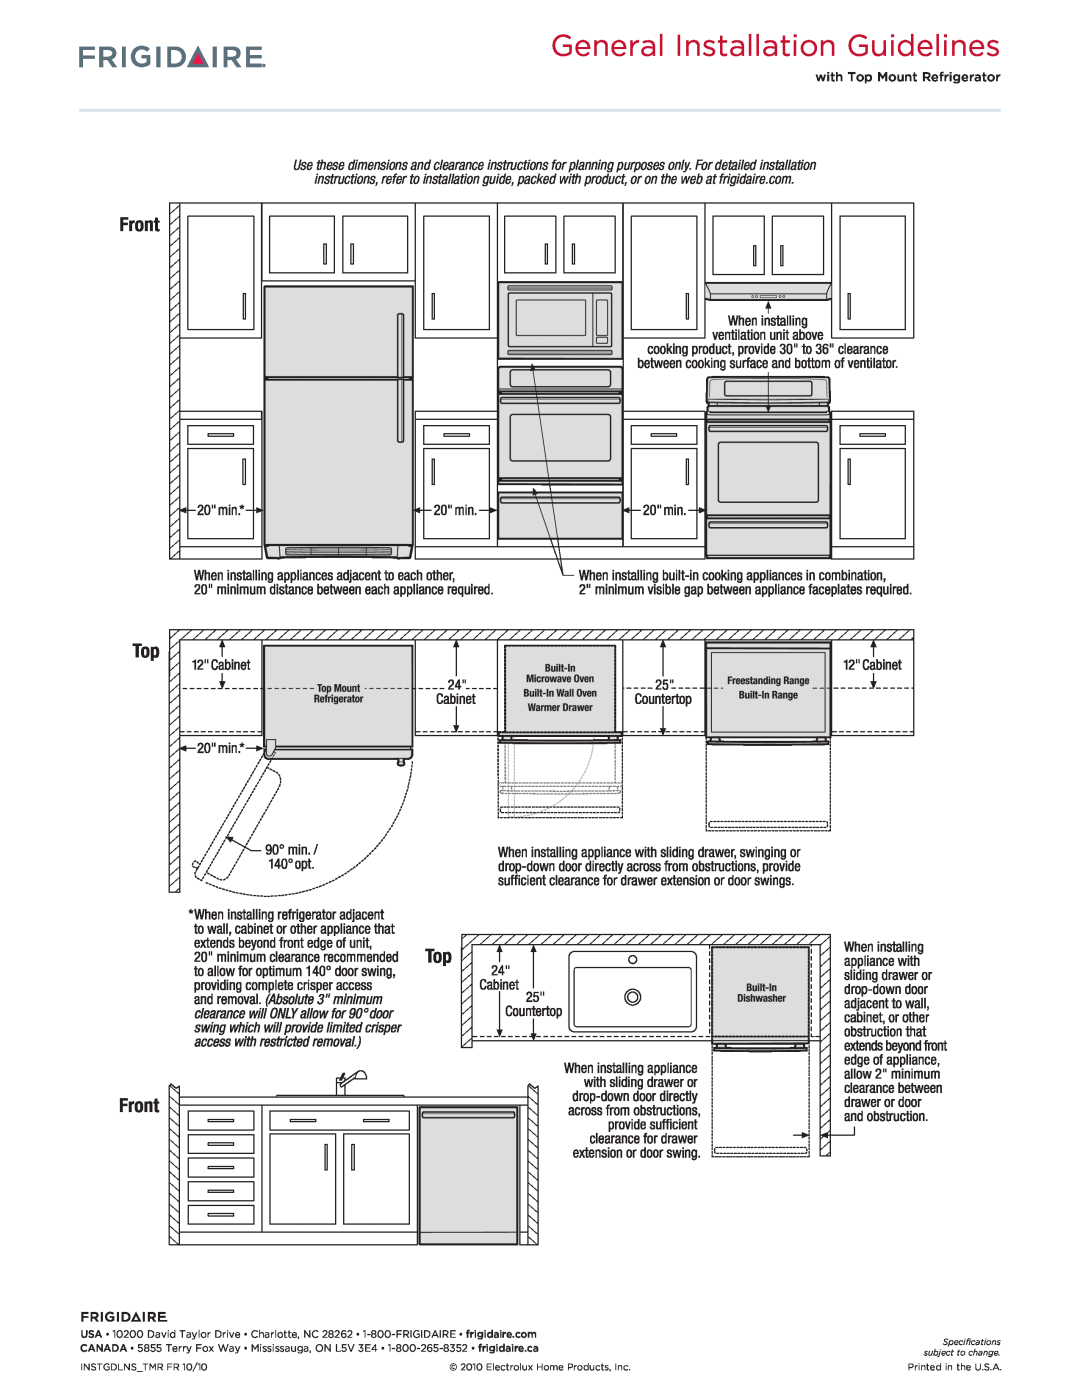 Frigidaire FGET3065K General Installation Guidelines, Top Front, with Top Mount Refrigerator, INSTGDLNS TMR FR 10/10 